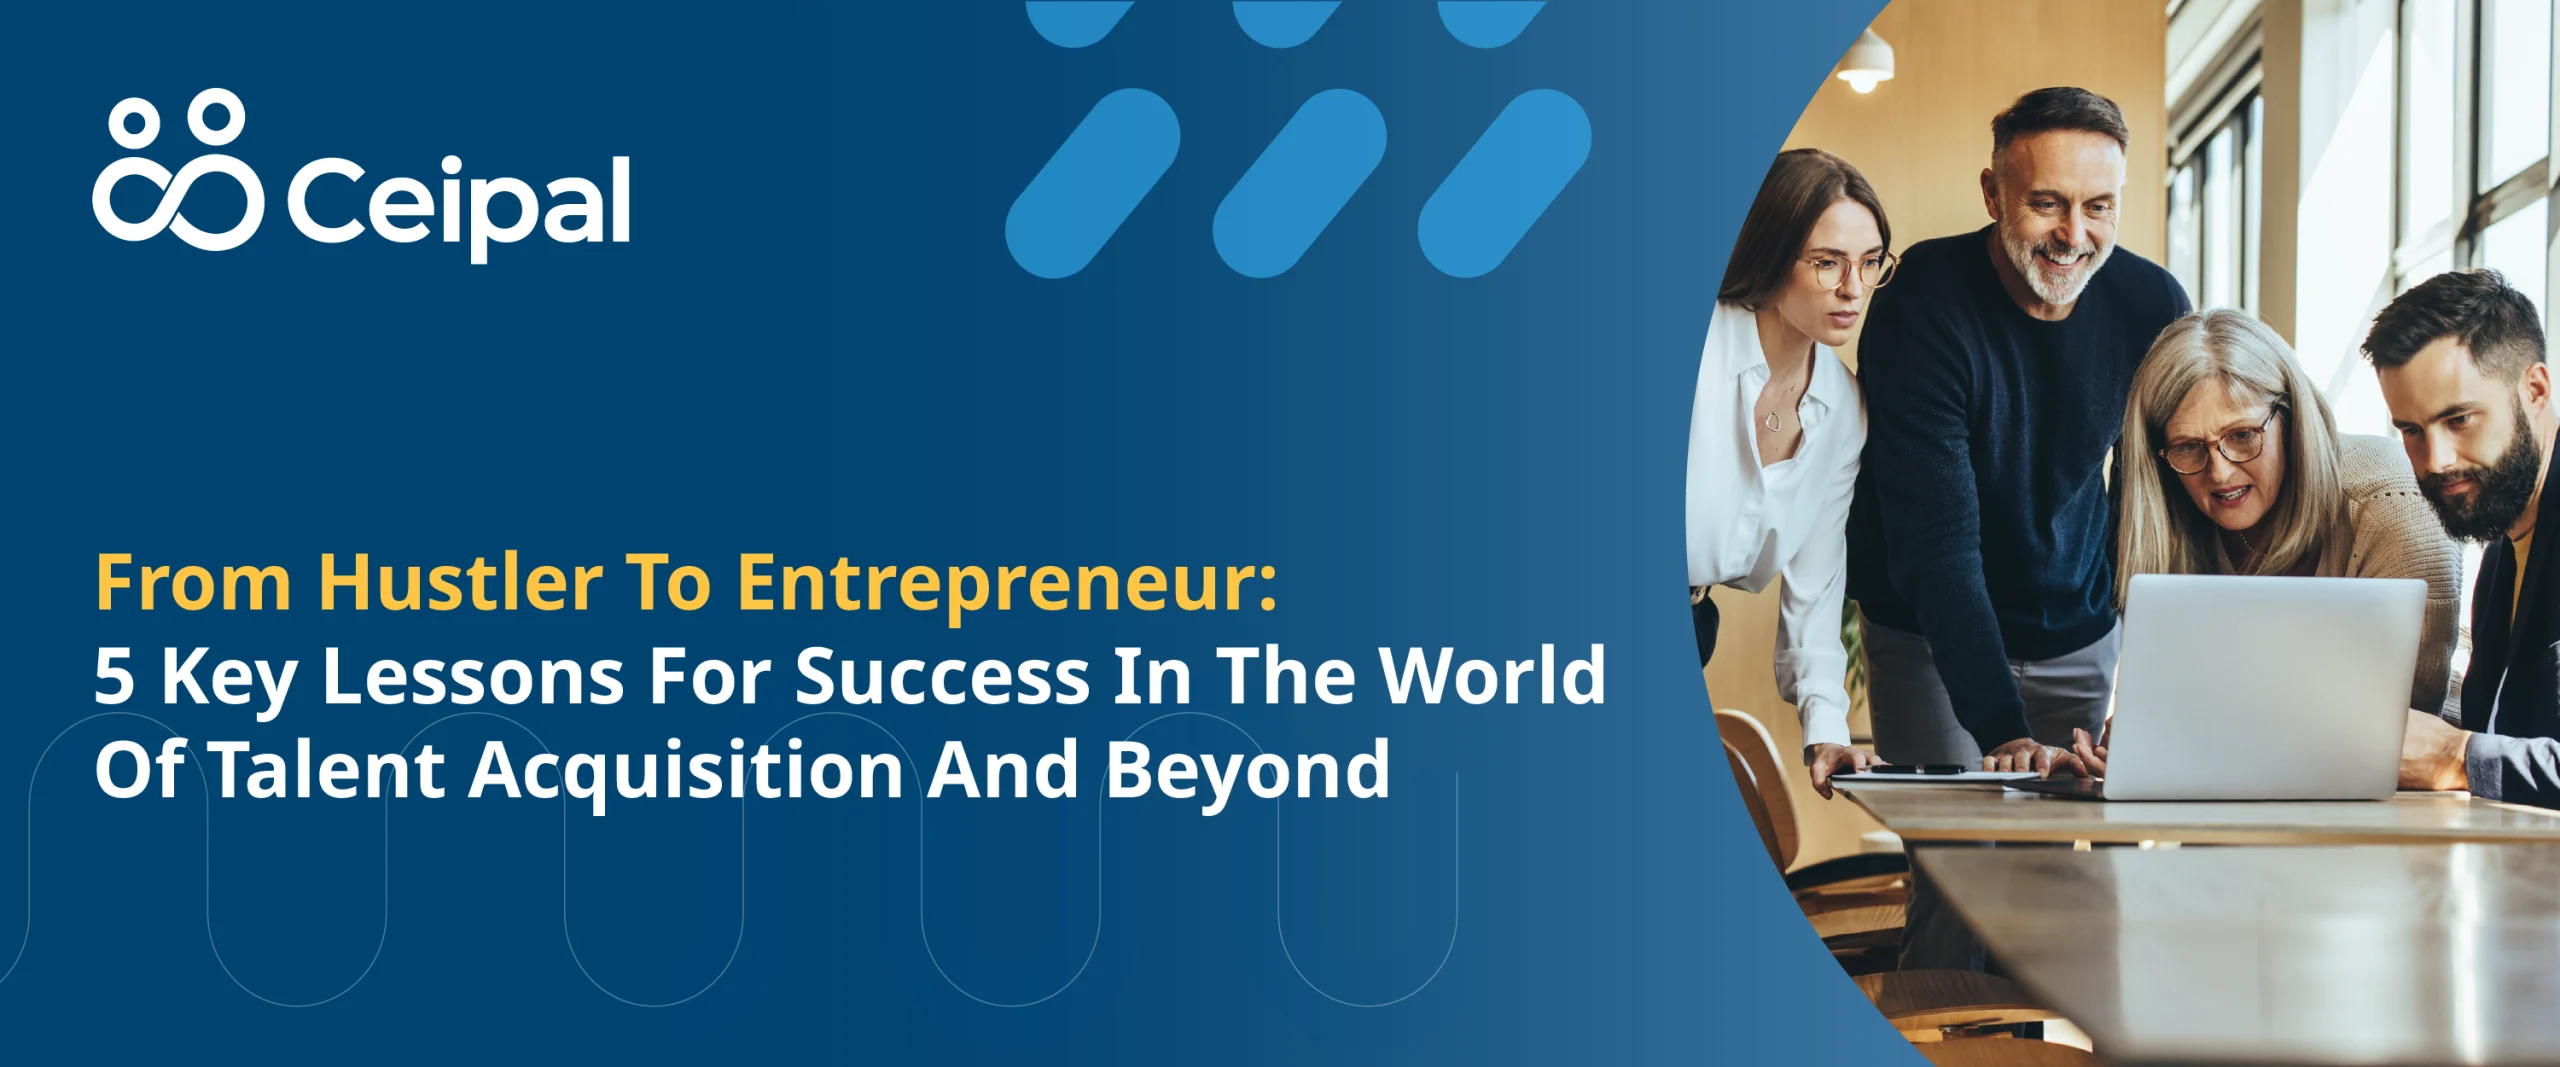 From Hustler to Entrepreneur: 5 Key Lesson for Success in the World of Talent Acquisition